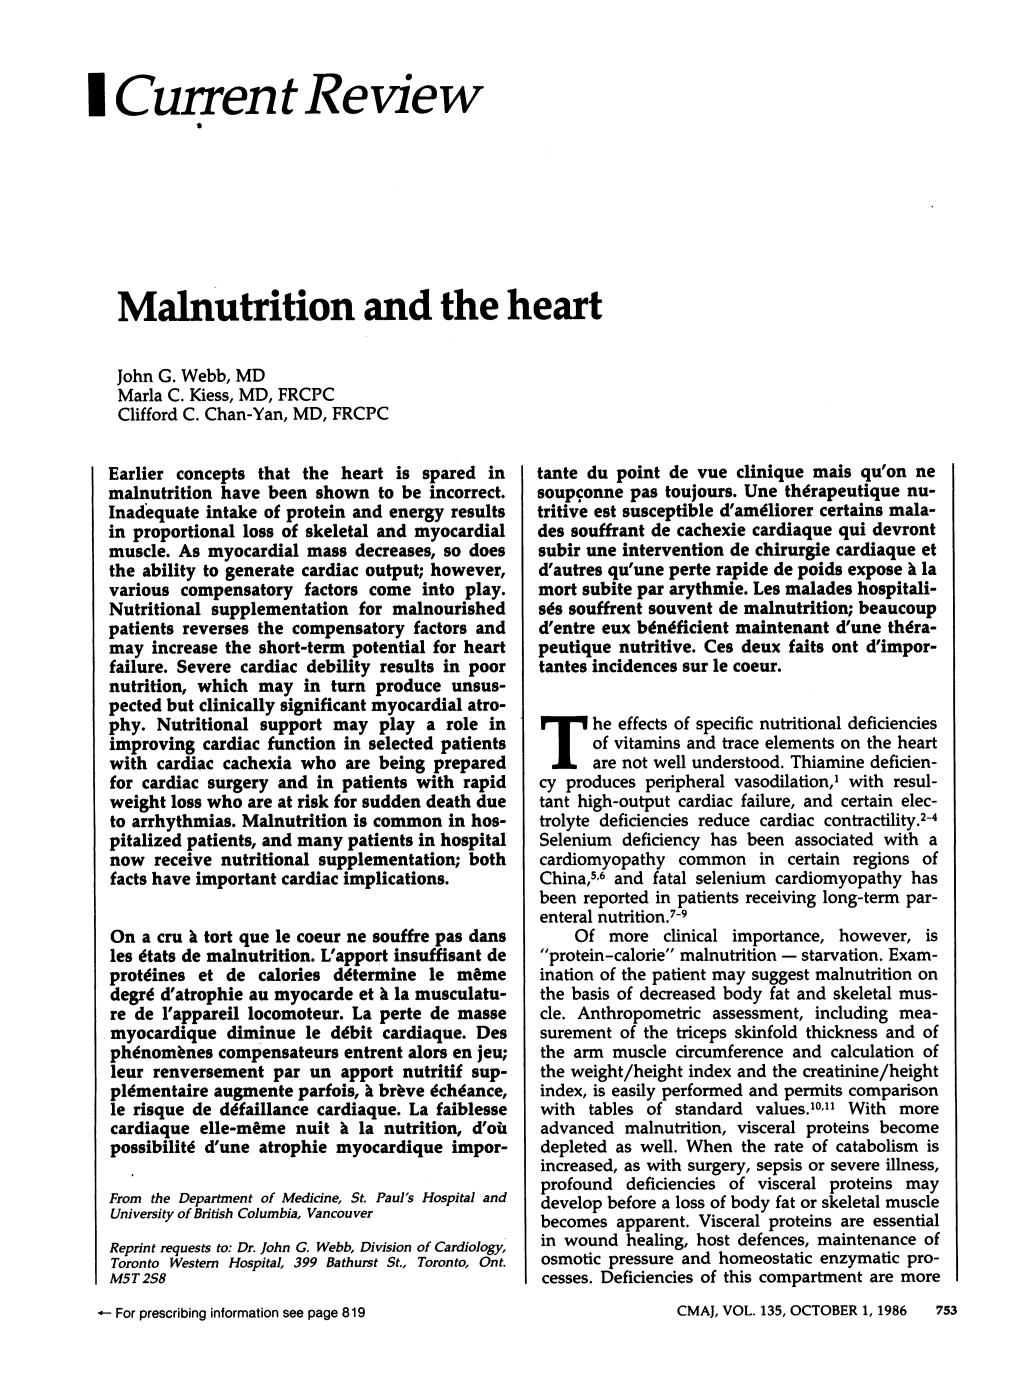 Malnutrition and the Heart